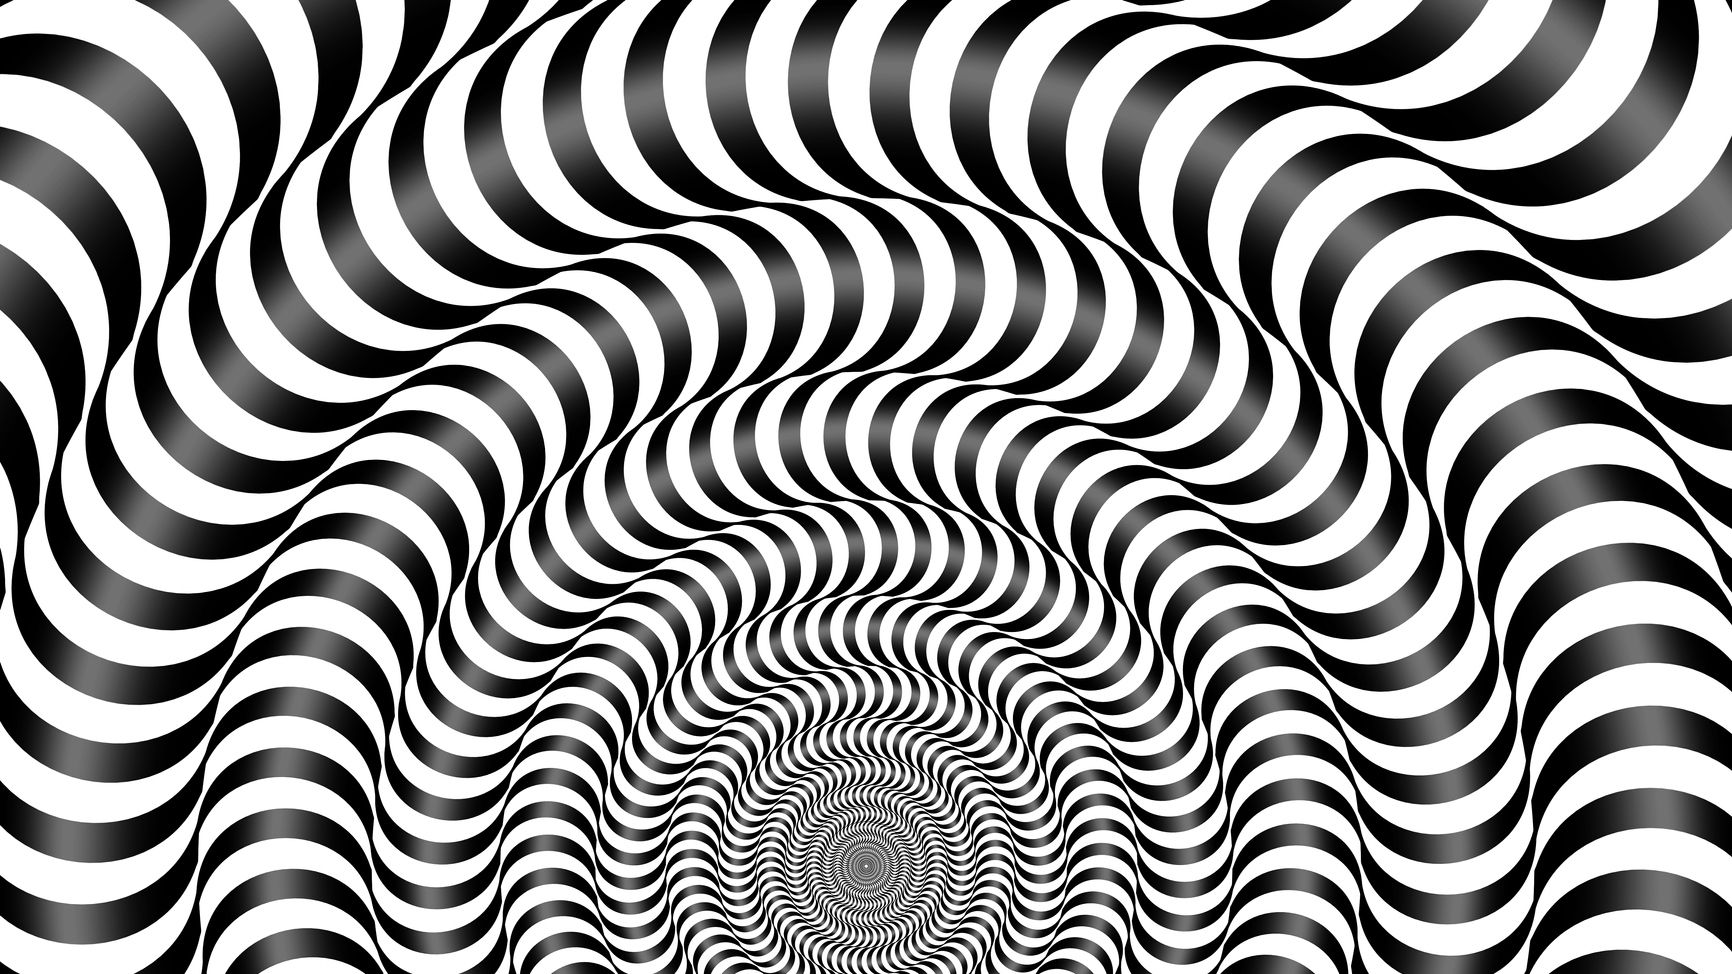 trippy moving illusions